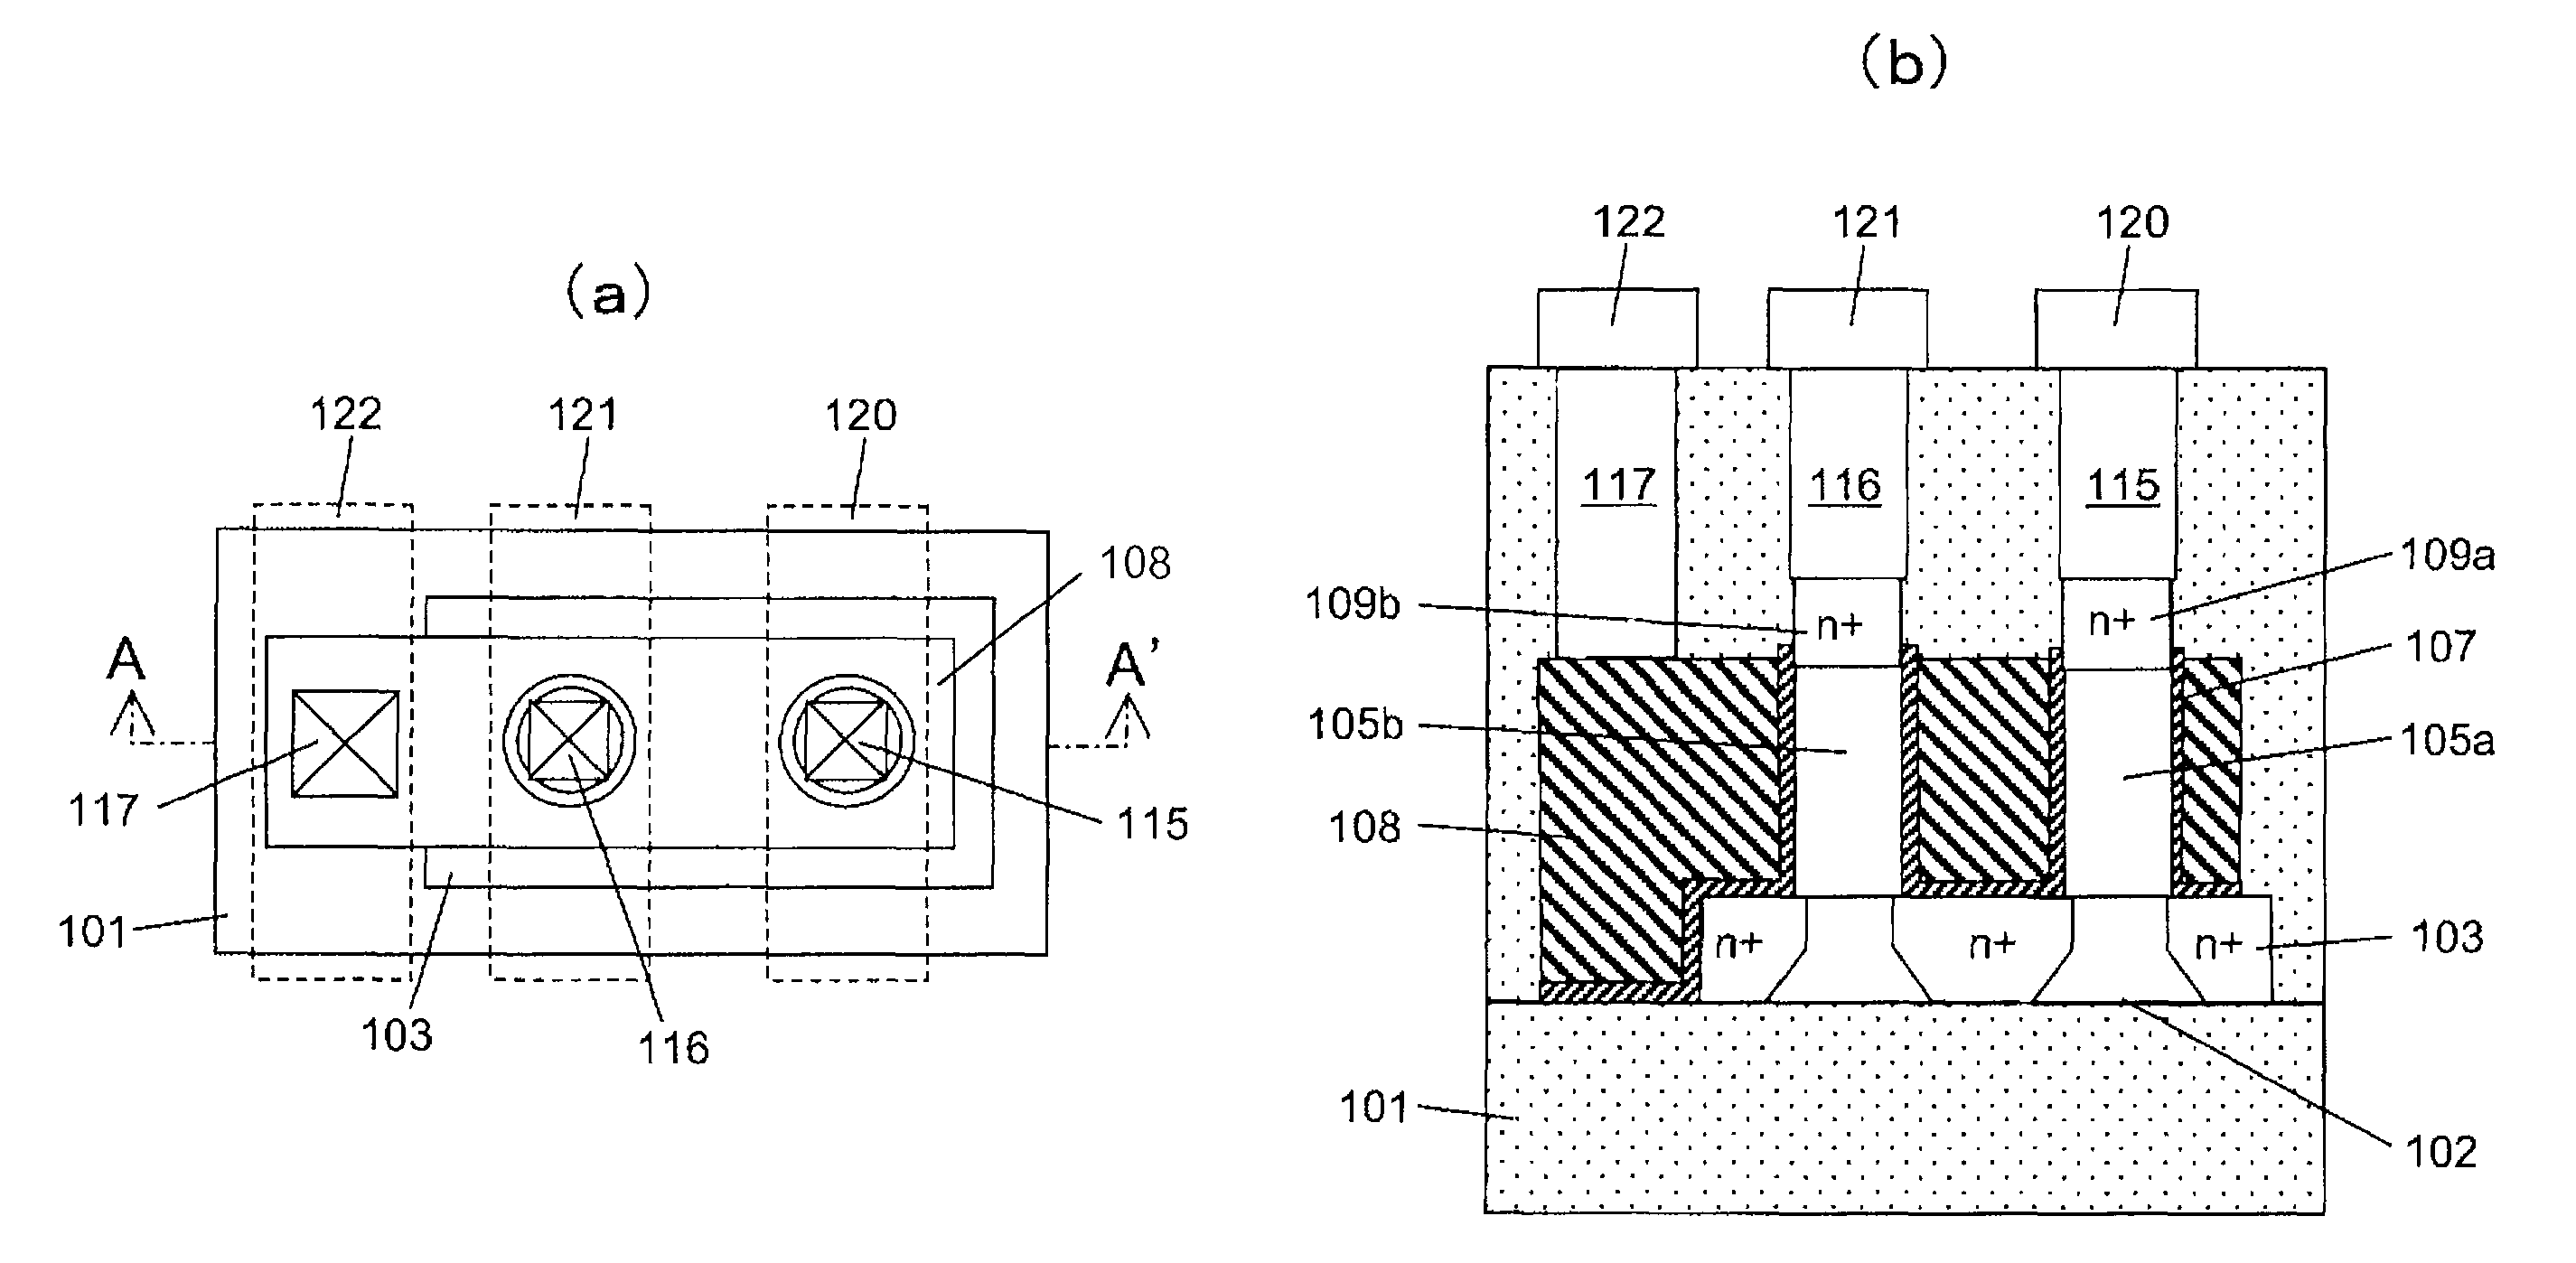 Semiconductor device having increased gate length implemented by surround gate transistor arrangements